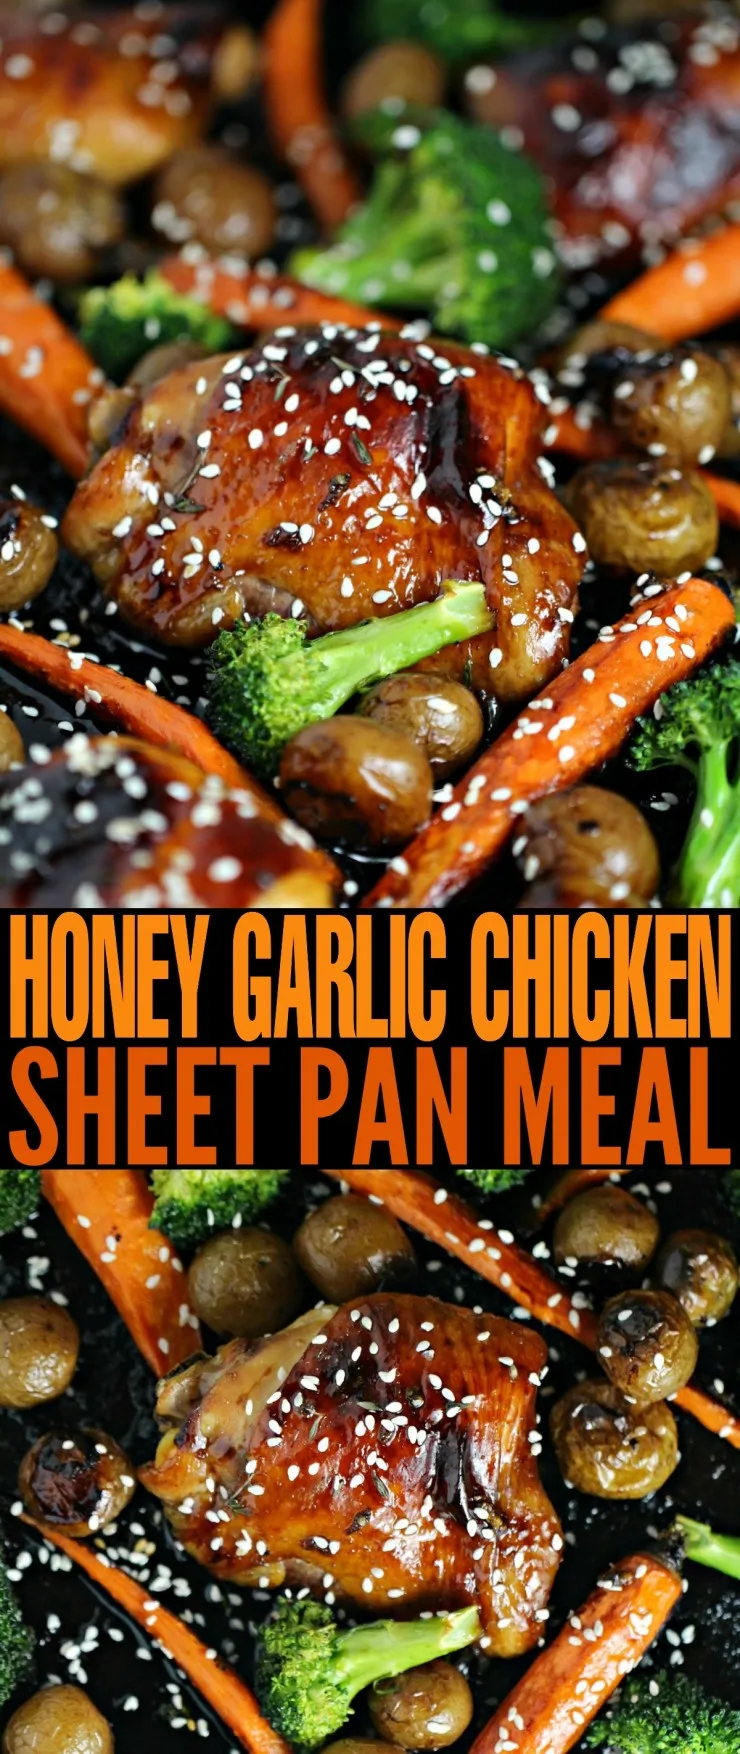 This Honey Garlic Chicken Sheet Pan Meal is complete with carrots, broccoli and baby potatoes. It's full of flavour, and quick and easy.